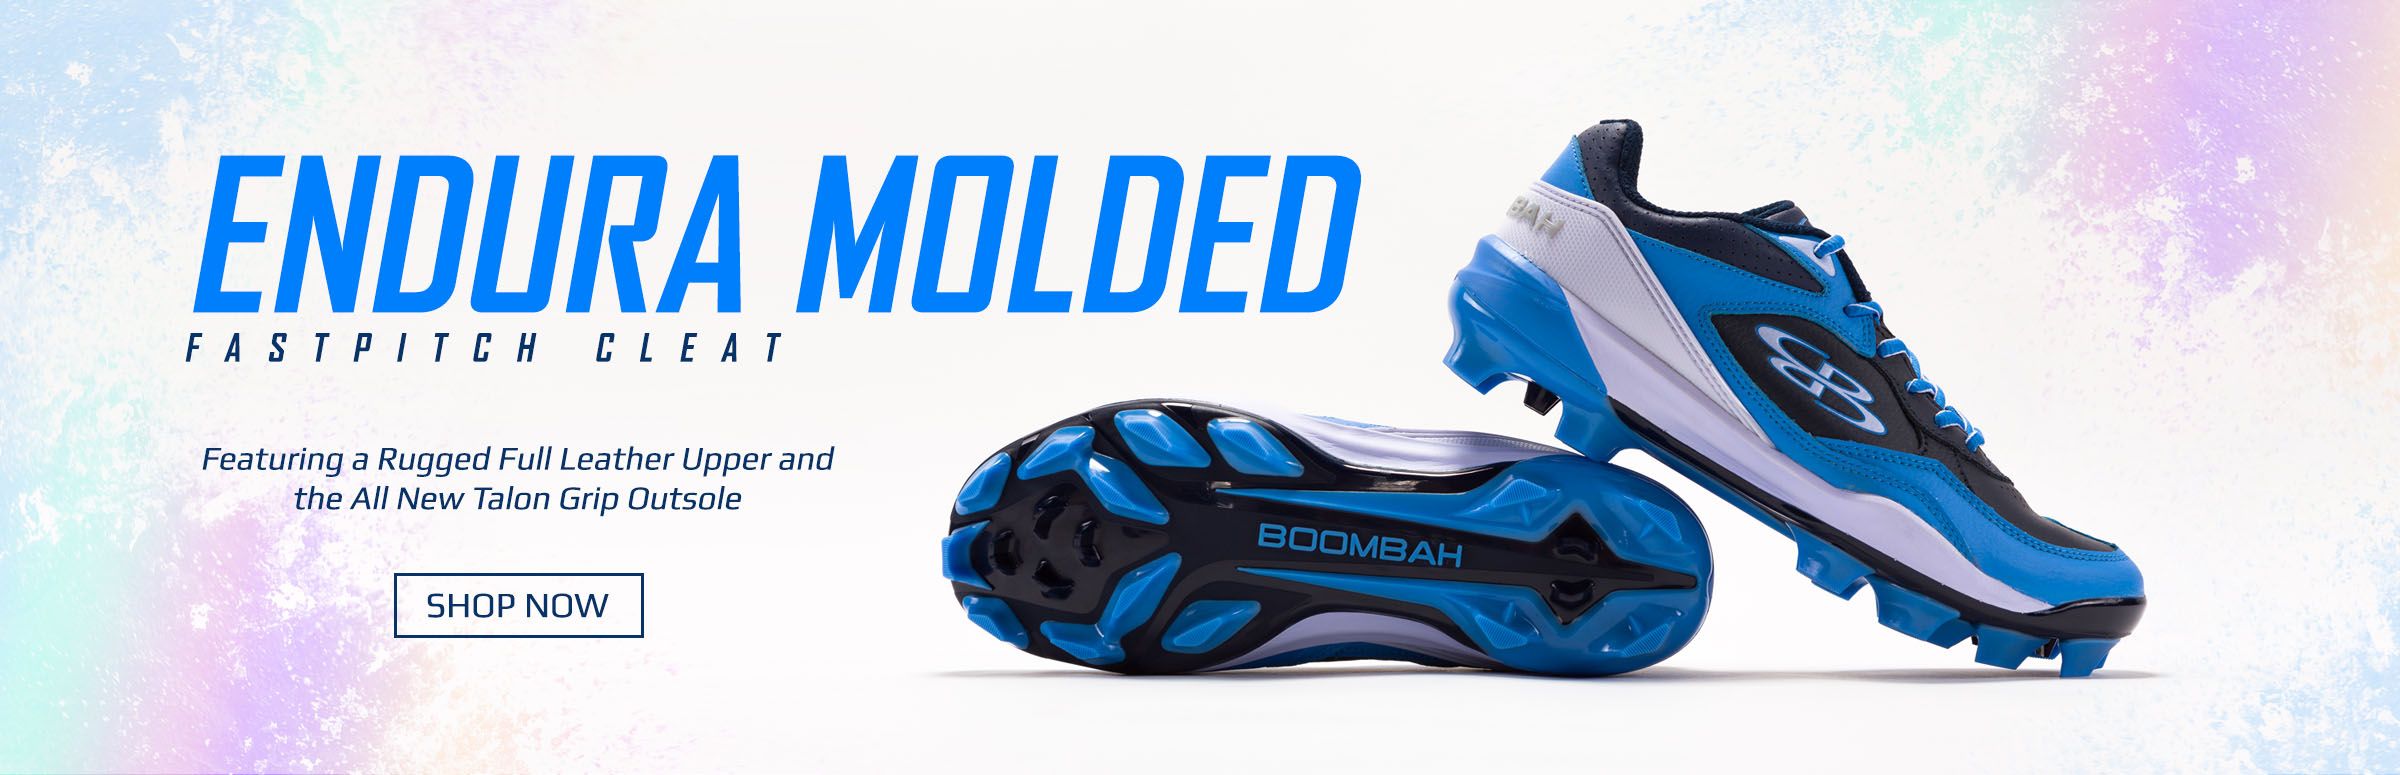 Endura Fastpitch Molded Cleat